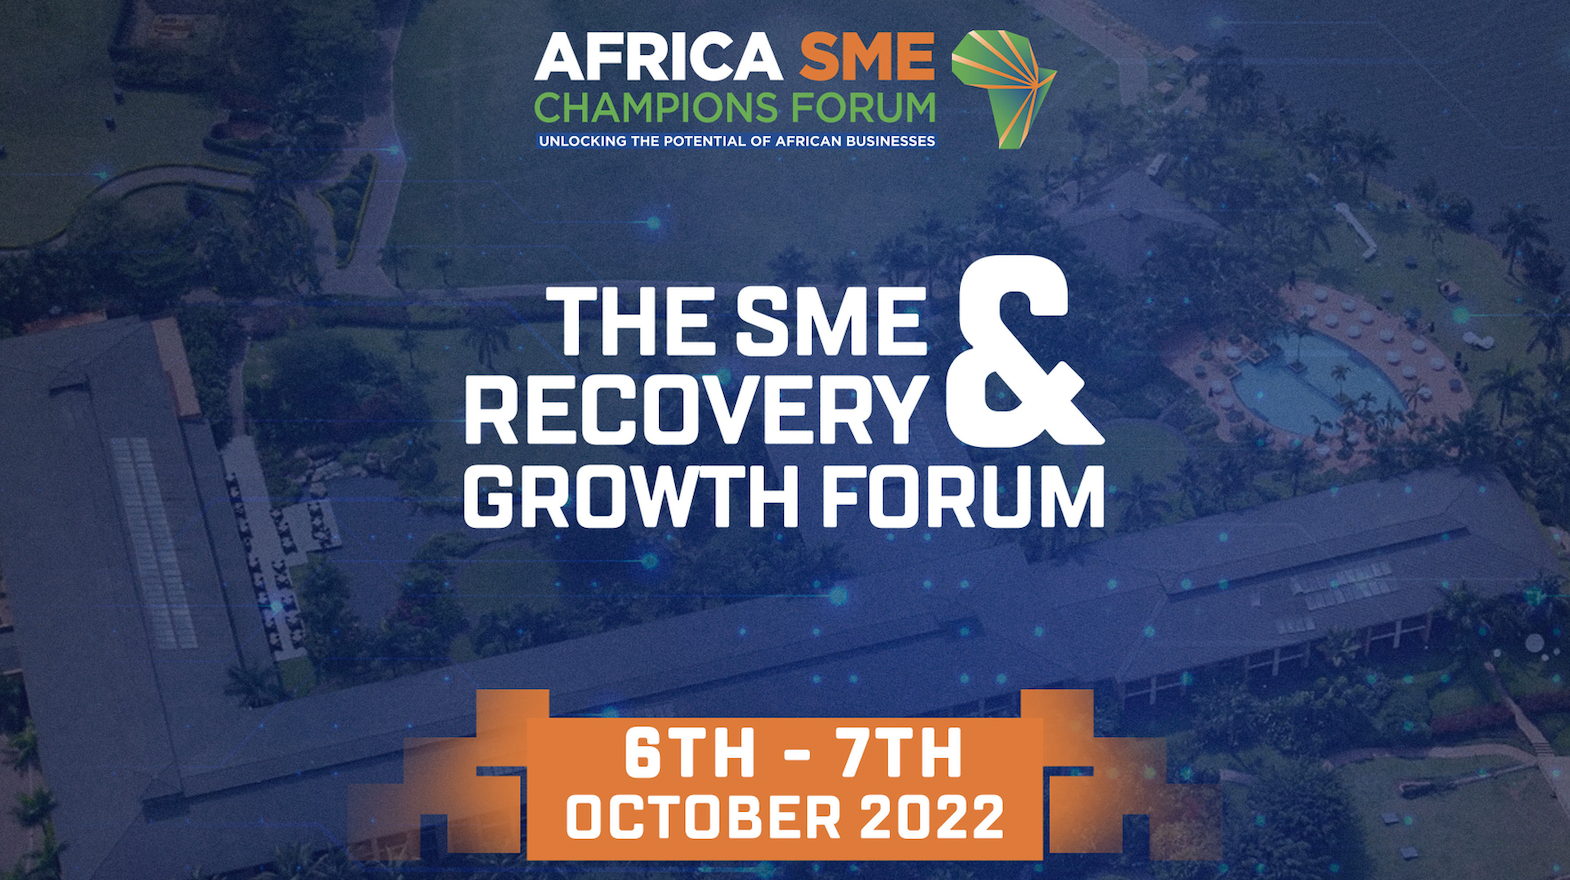 Uganda to Host African SME Forum Aimed at Developing Investment and Markets